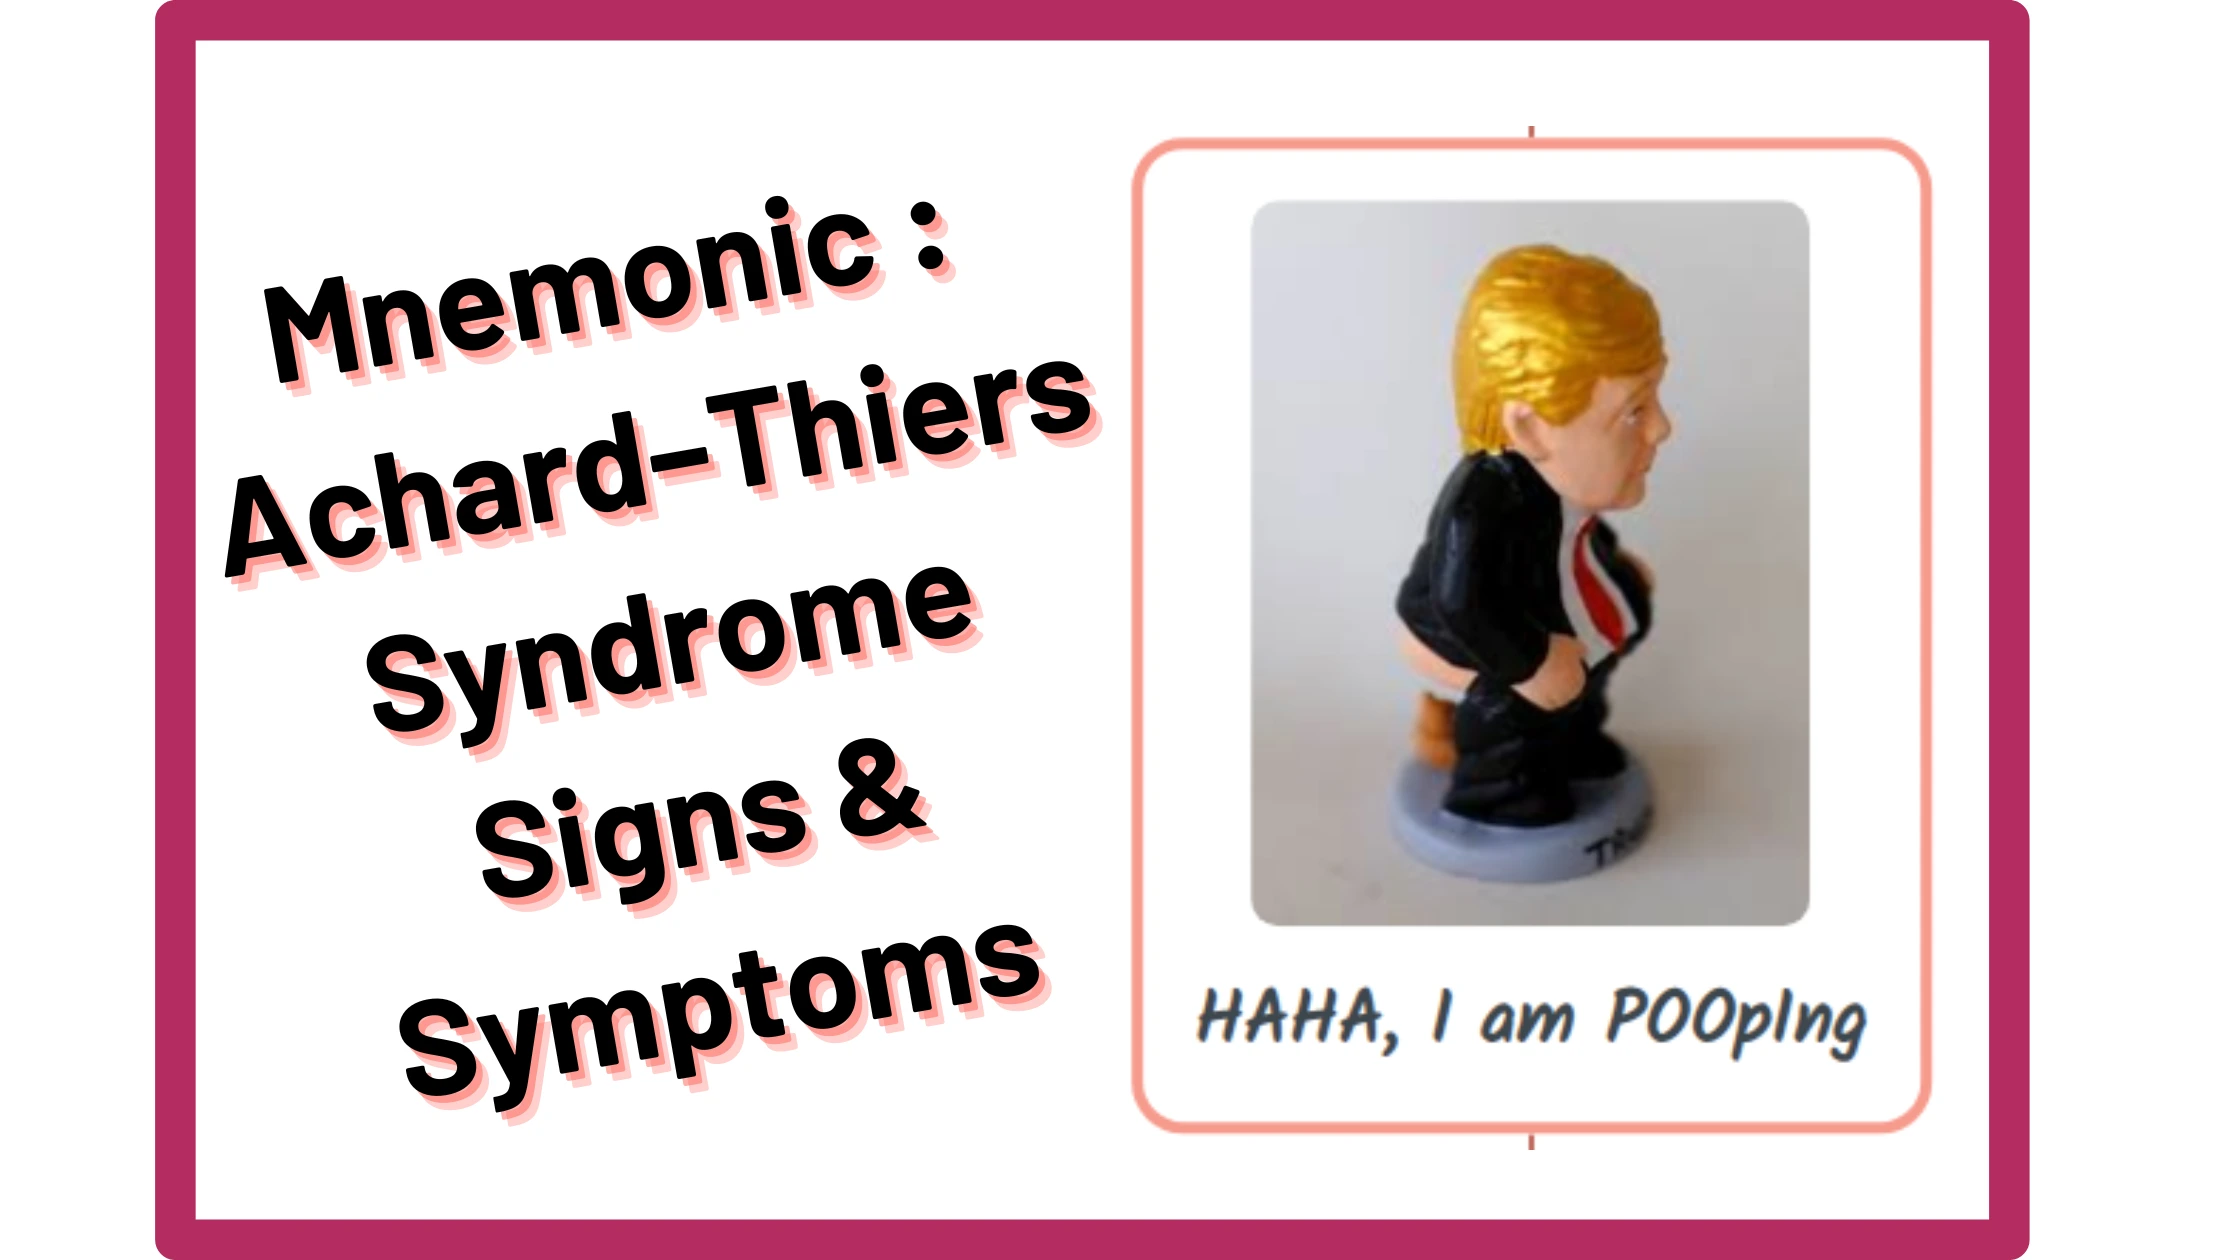 You are currently viewing [Very Cool] Mnemonic : Achard–Thiers Syndrome Signs & Symptoms